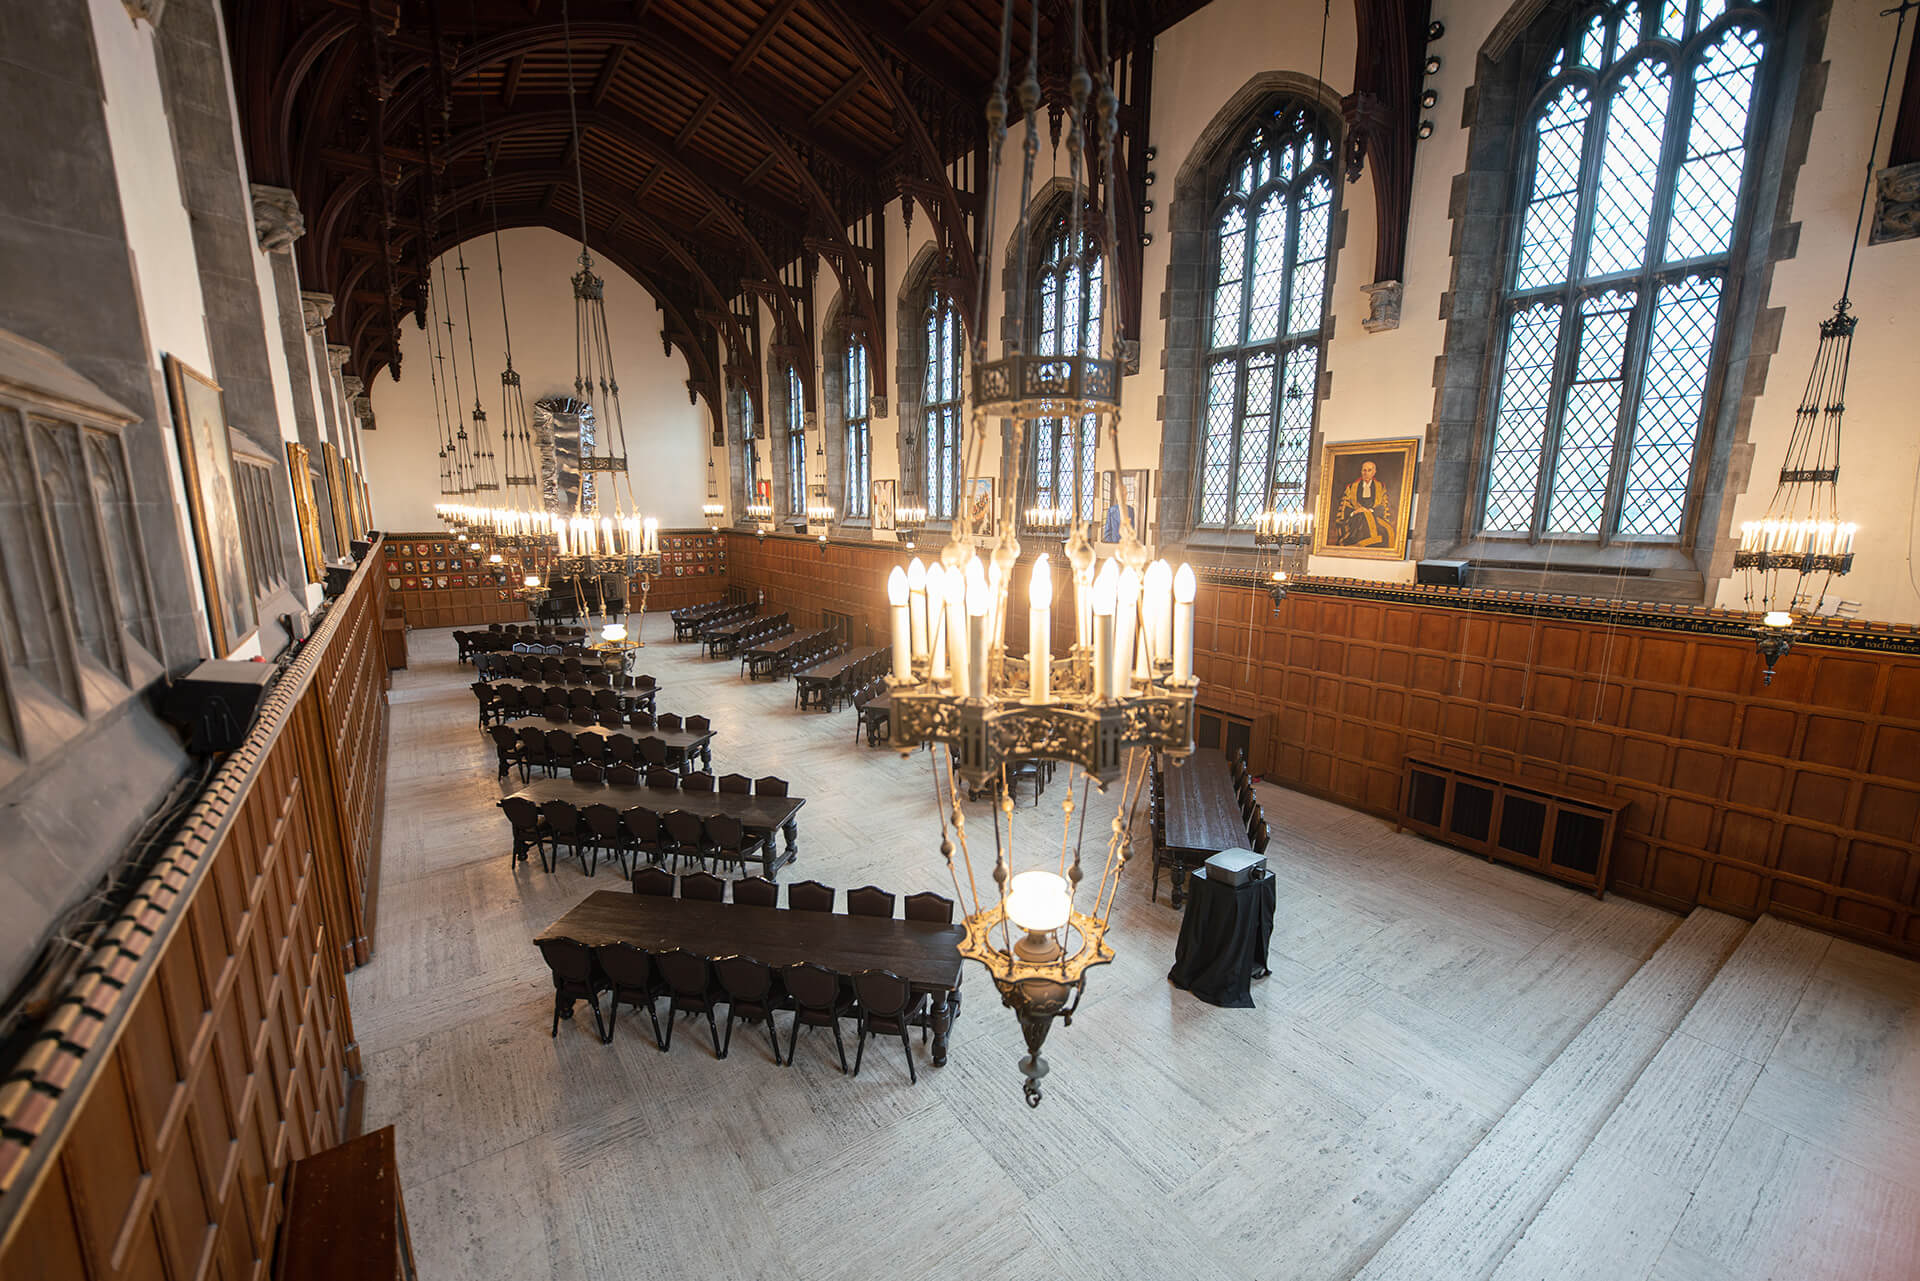 A view of the Great Hall from overhead, with bare, wooden tables